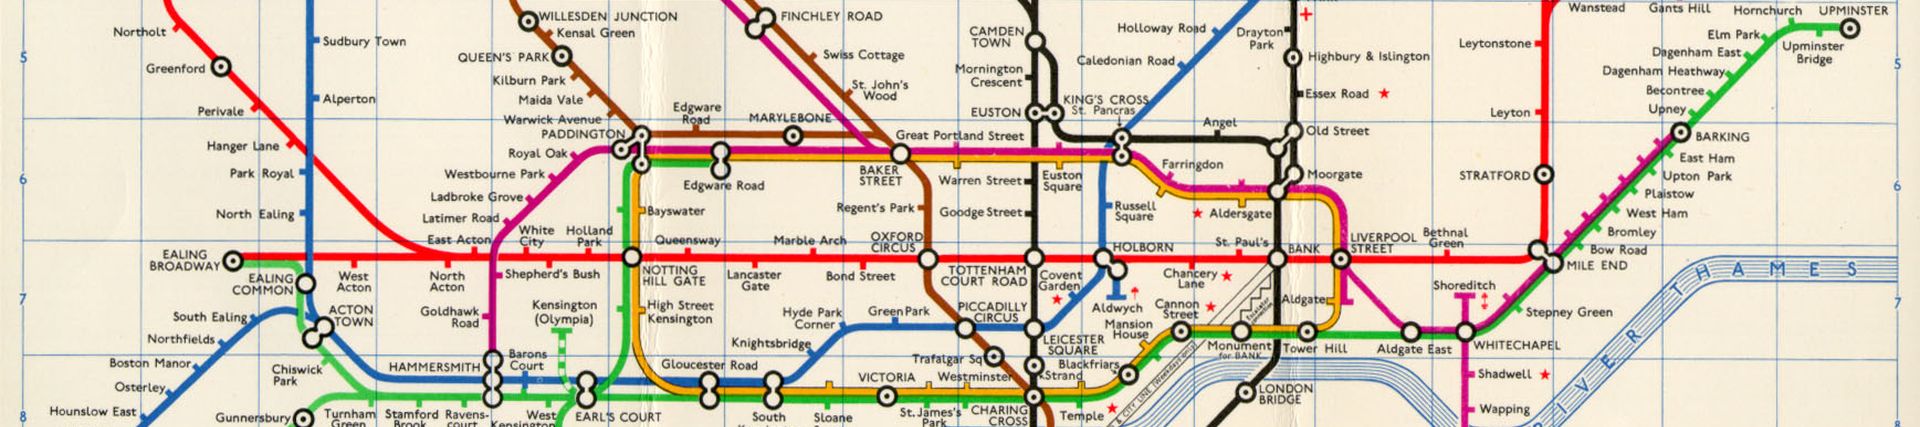 A diagrammatic map of London Underground's lines